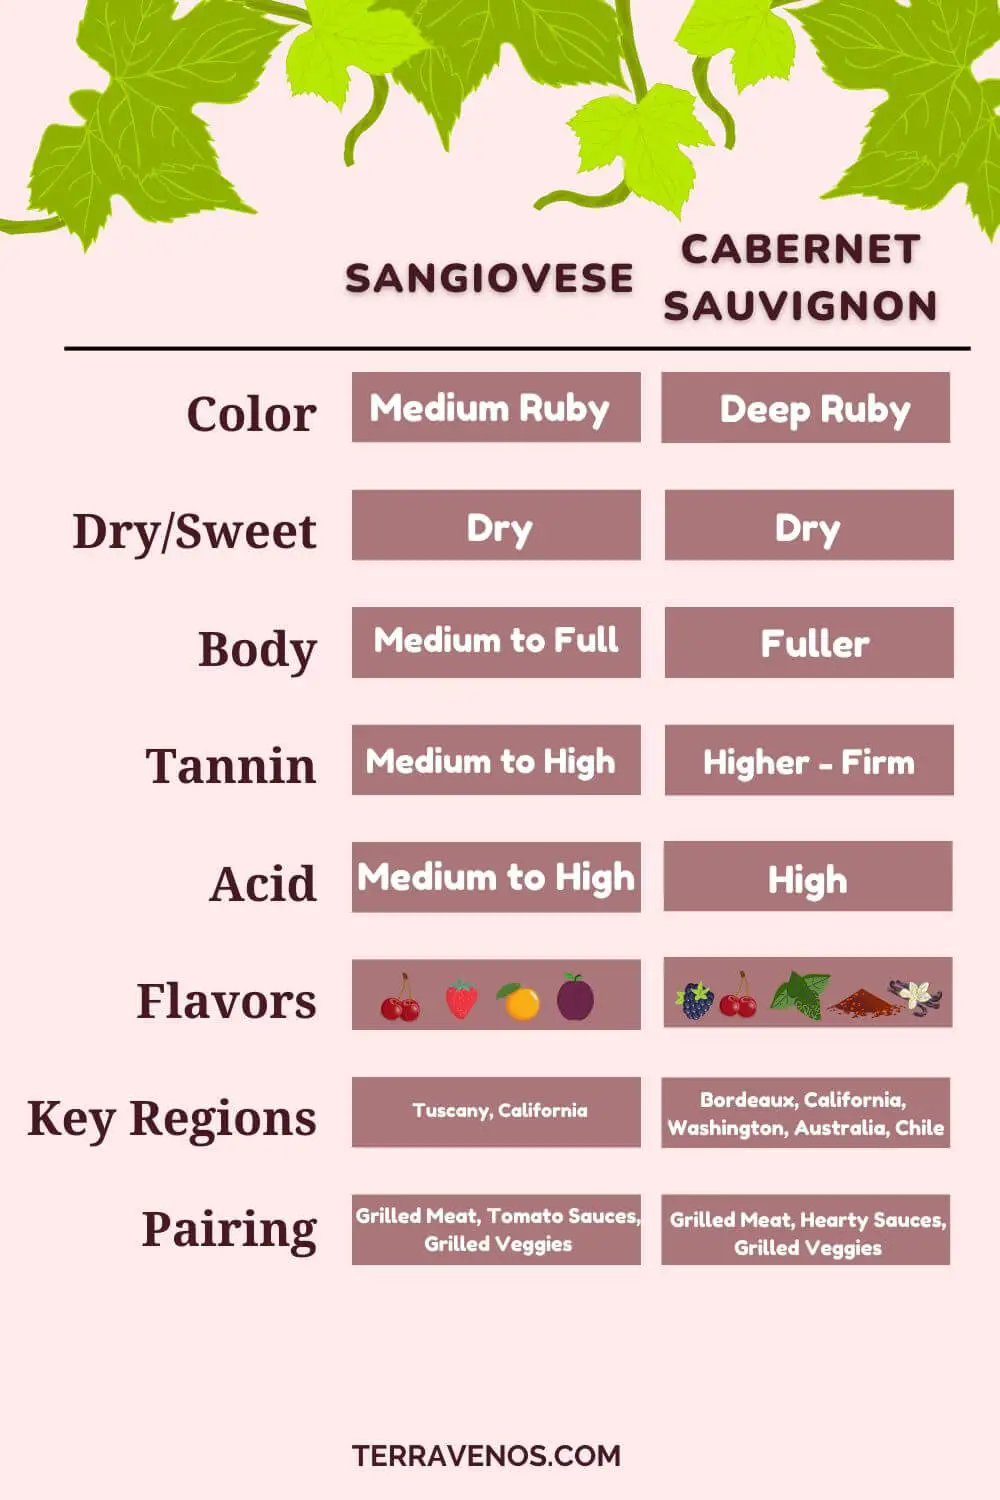 cabernet-sauvignon-vs-sangiovese-side-by-side-infographic